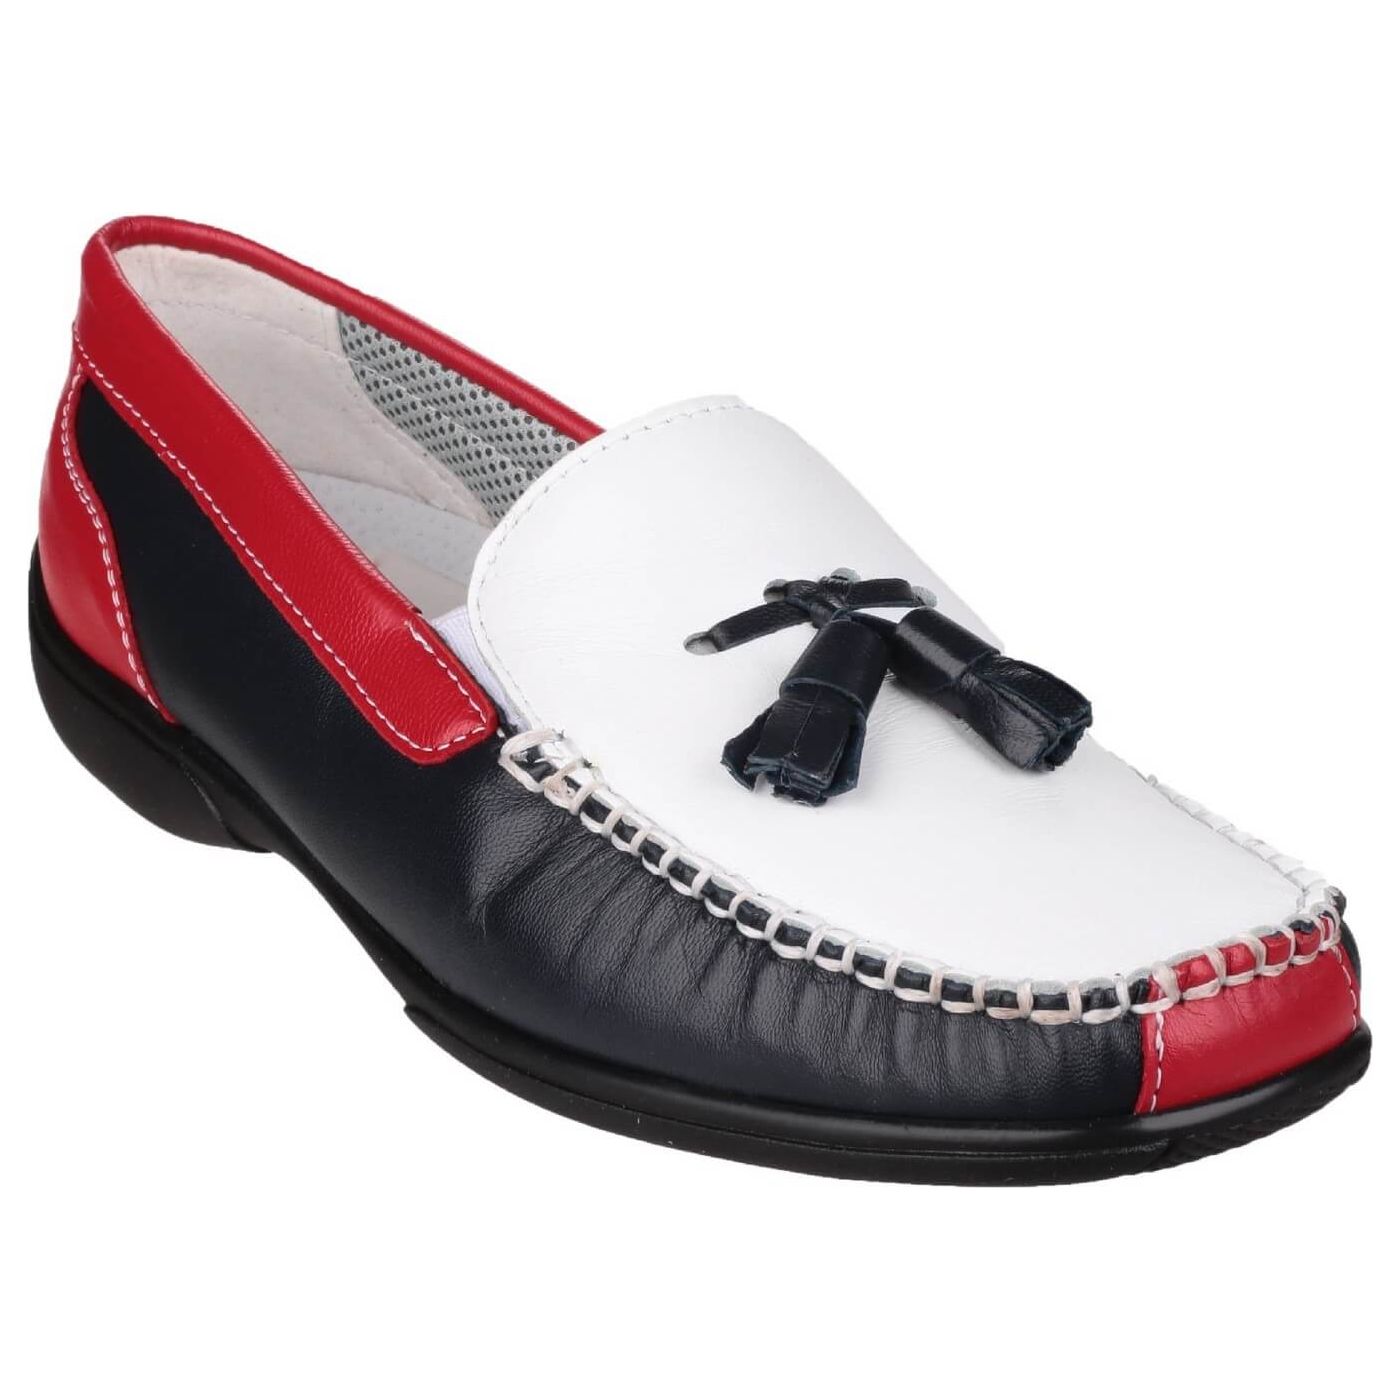 Cotswold Biddlestone Loafer Shoes Womens